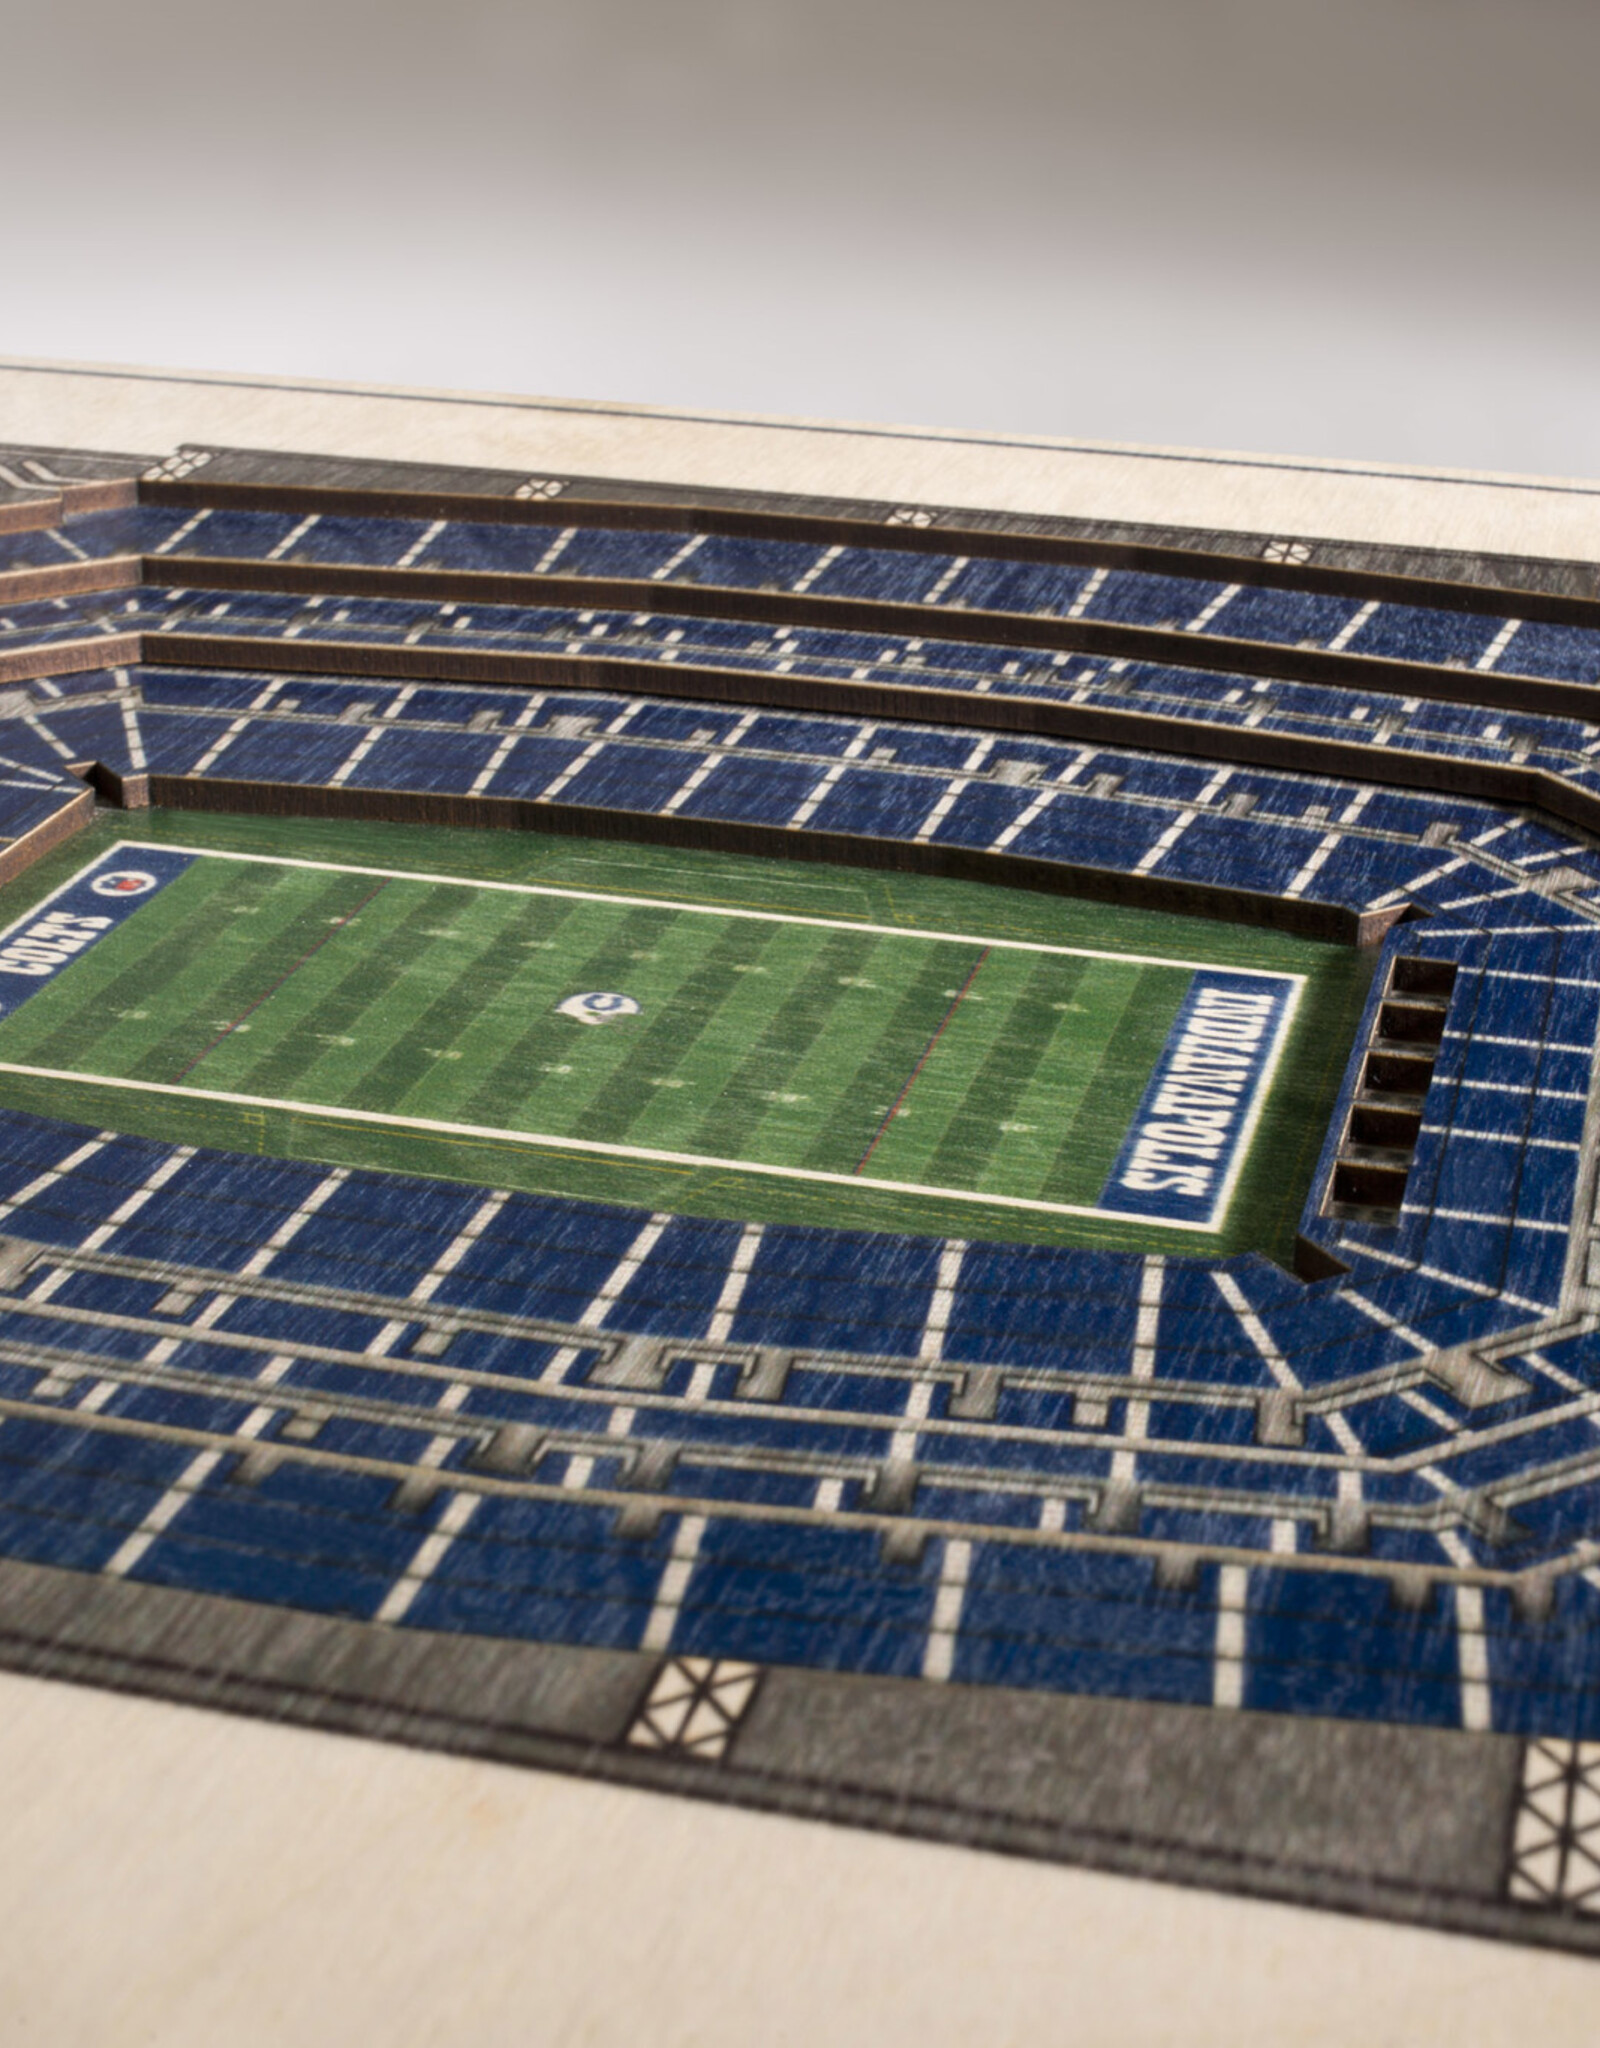 YOU THE FAN Indianapolis Colts 5-Layer 3D StadiumView Wall Art